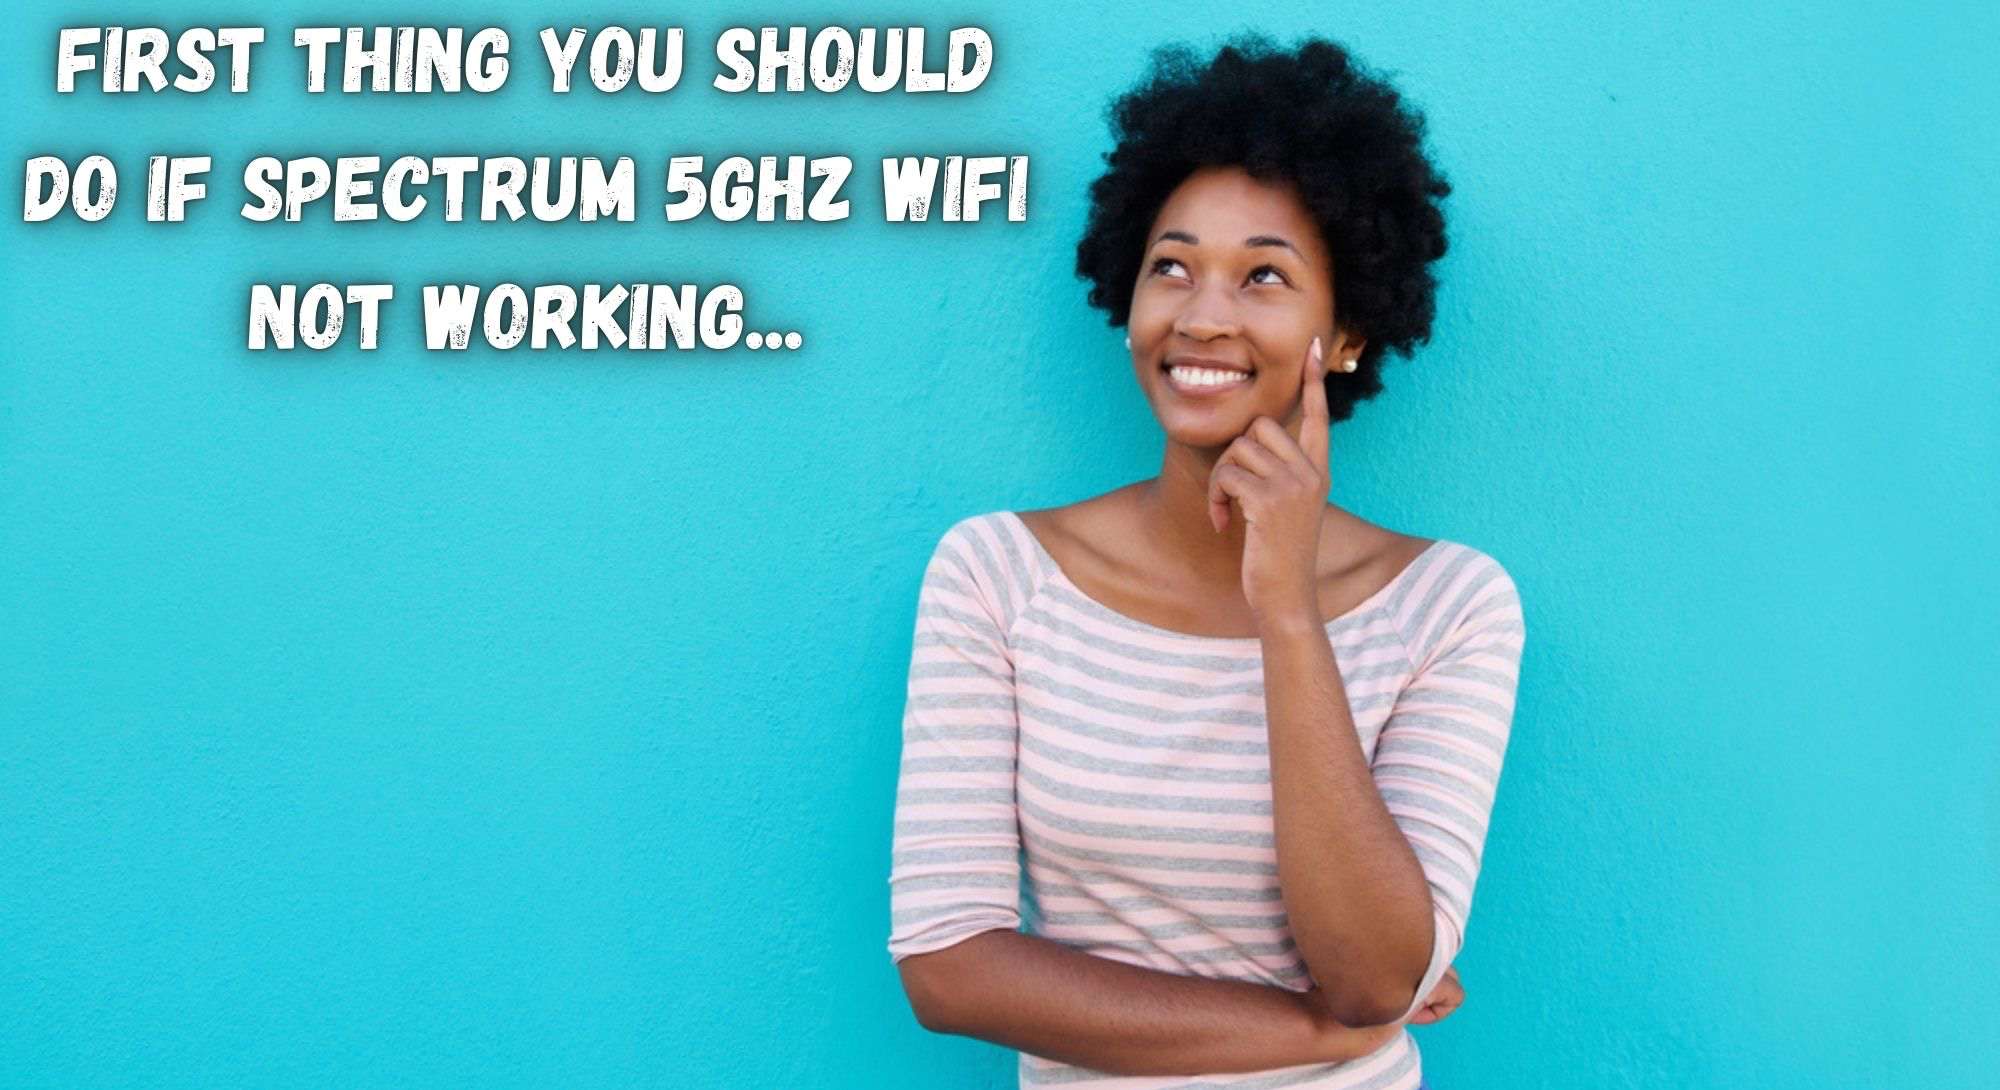 The First Thing that you should do if Spectrum 5GHz WiFi Not Working